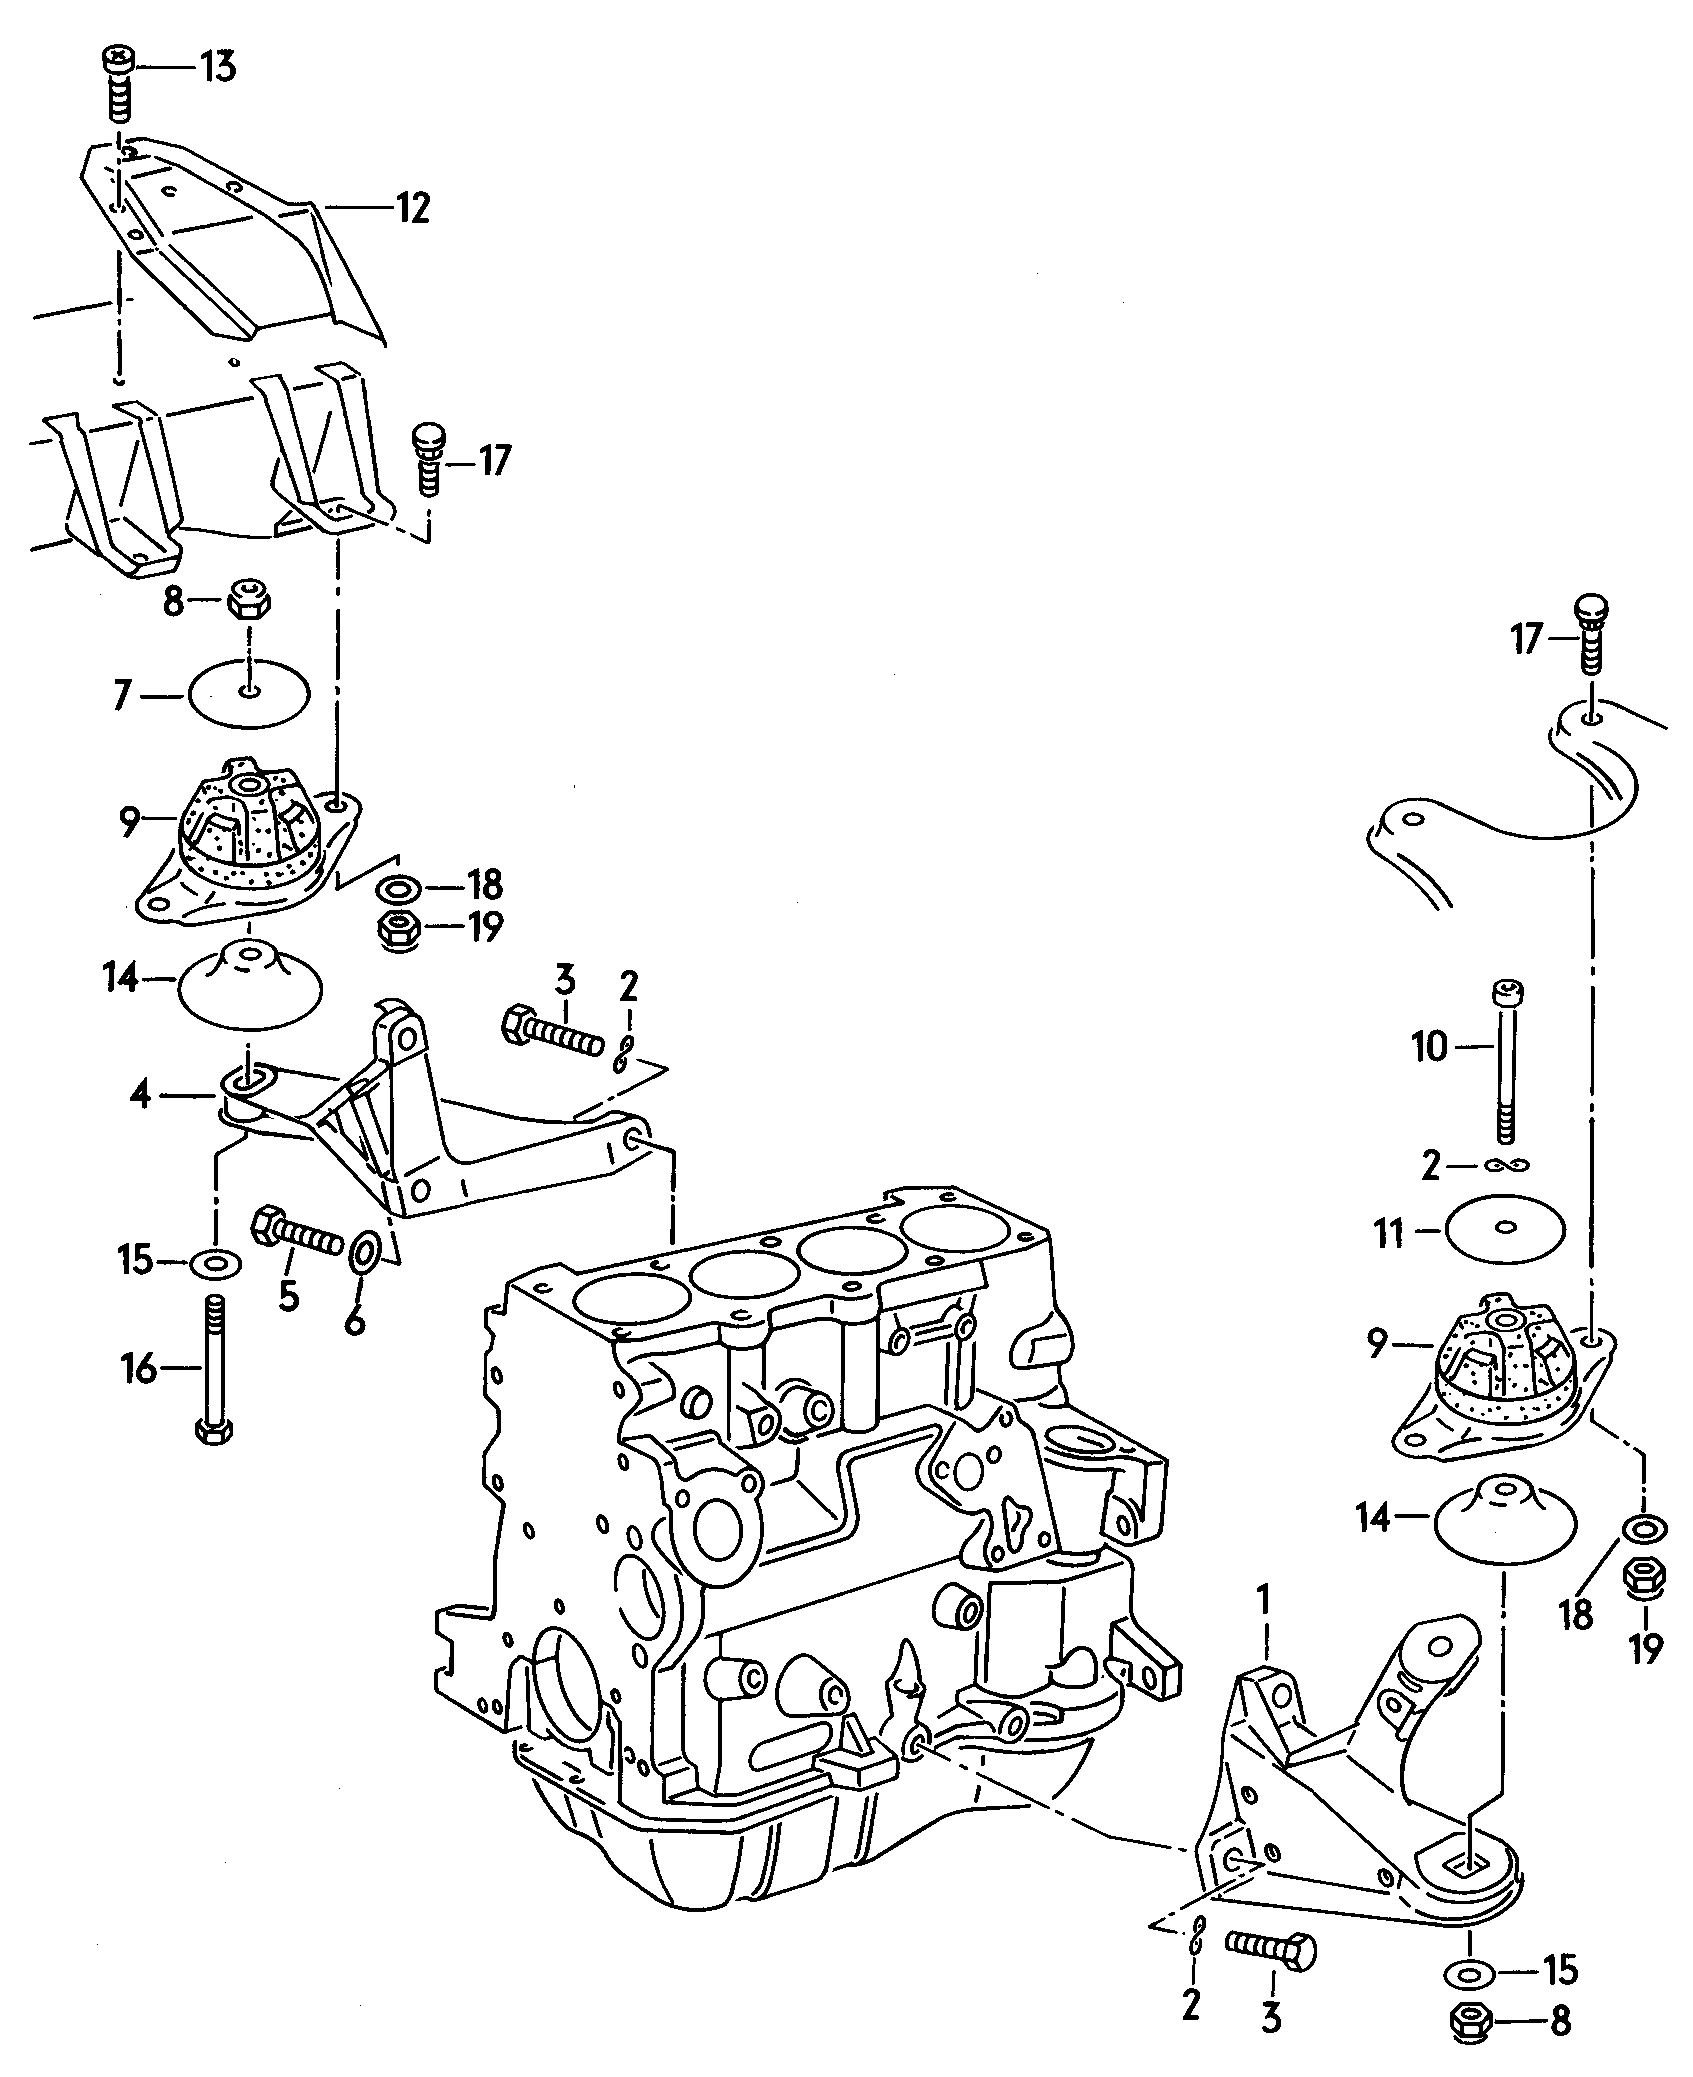 securing parts for engine - Audi 100/Avant(A100)  